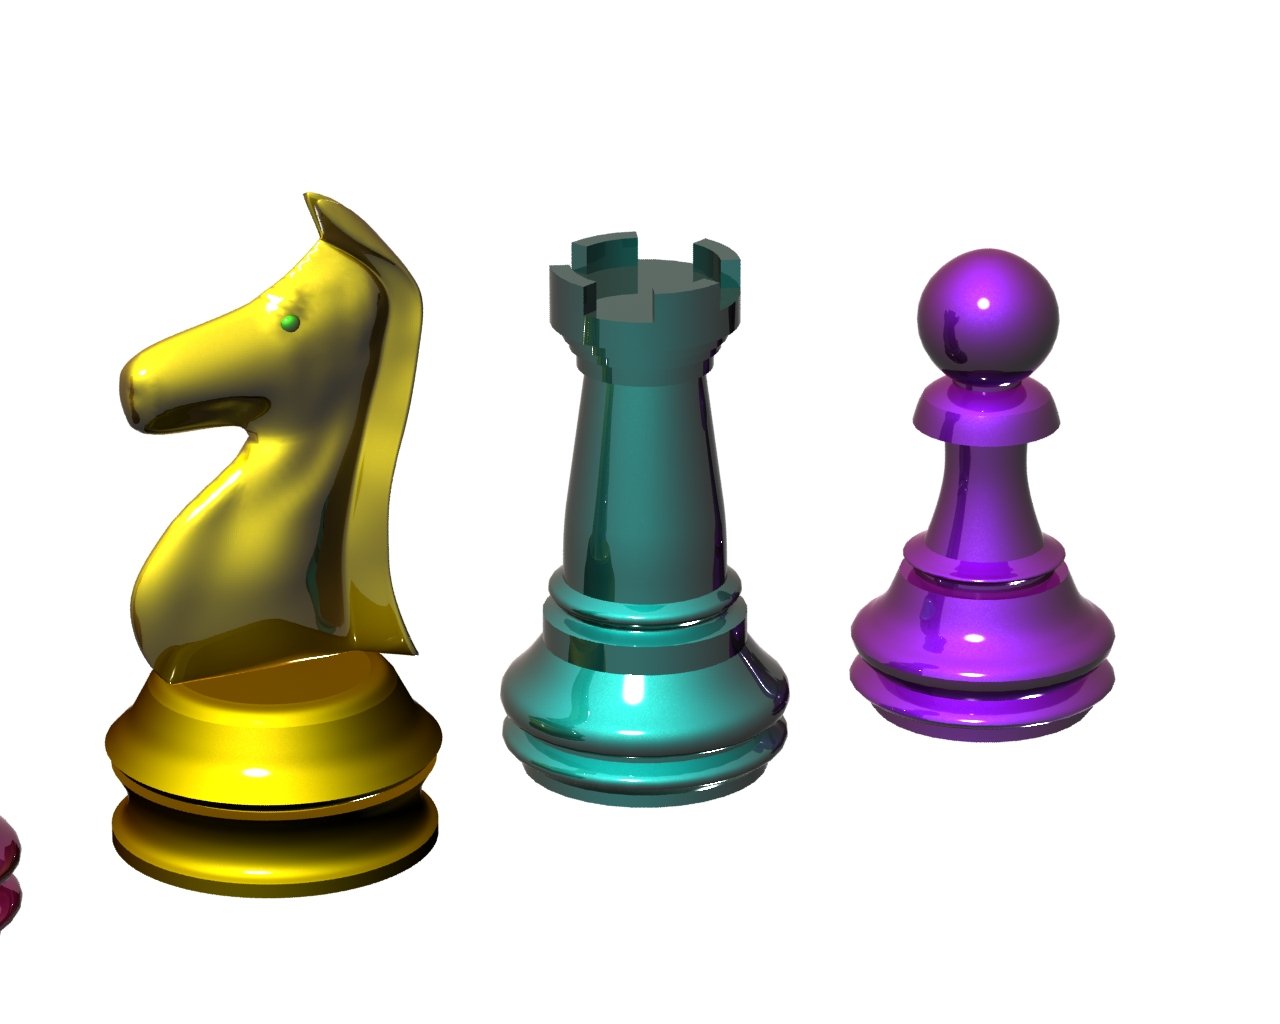 ION M.G Chess free downloads